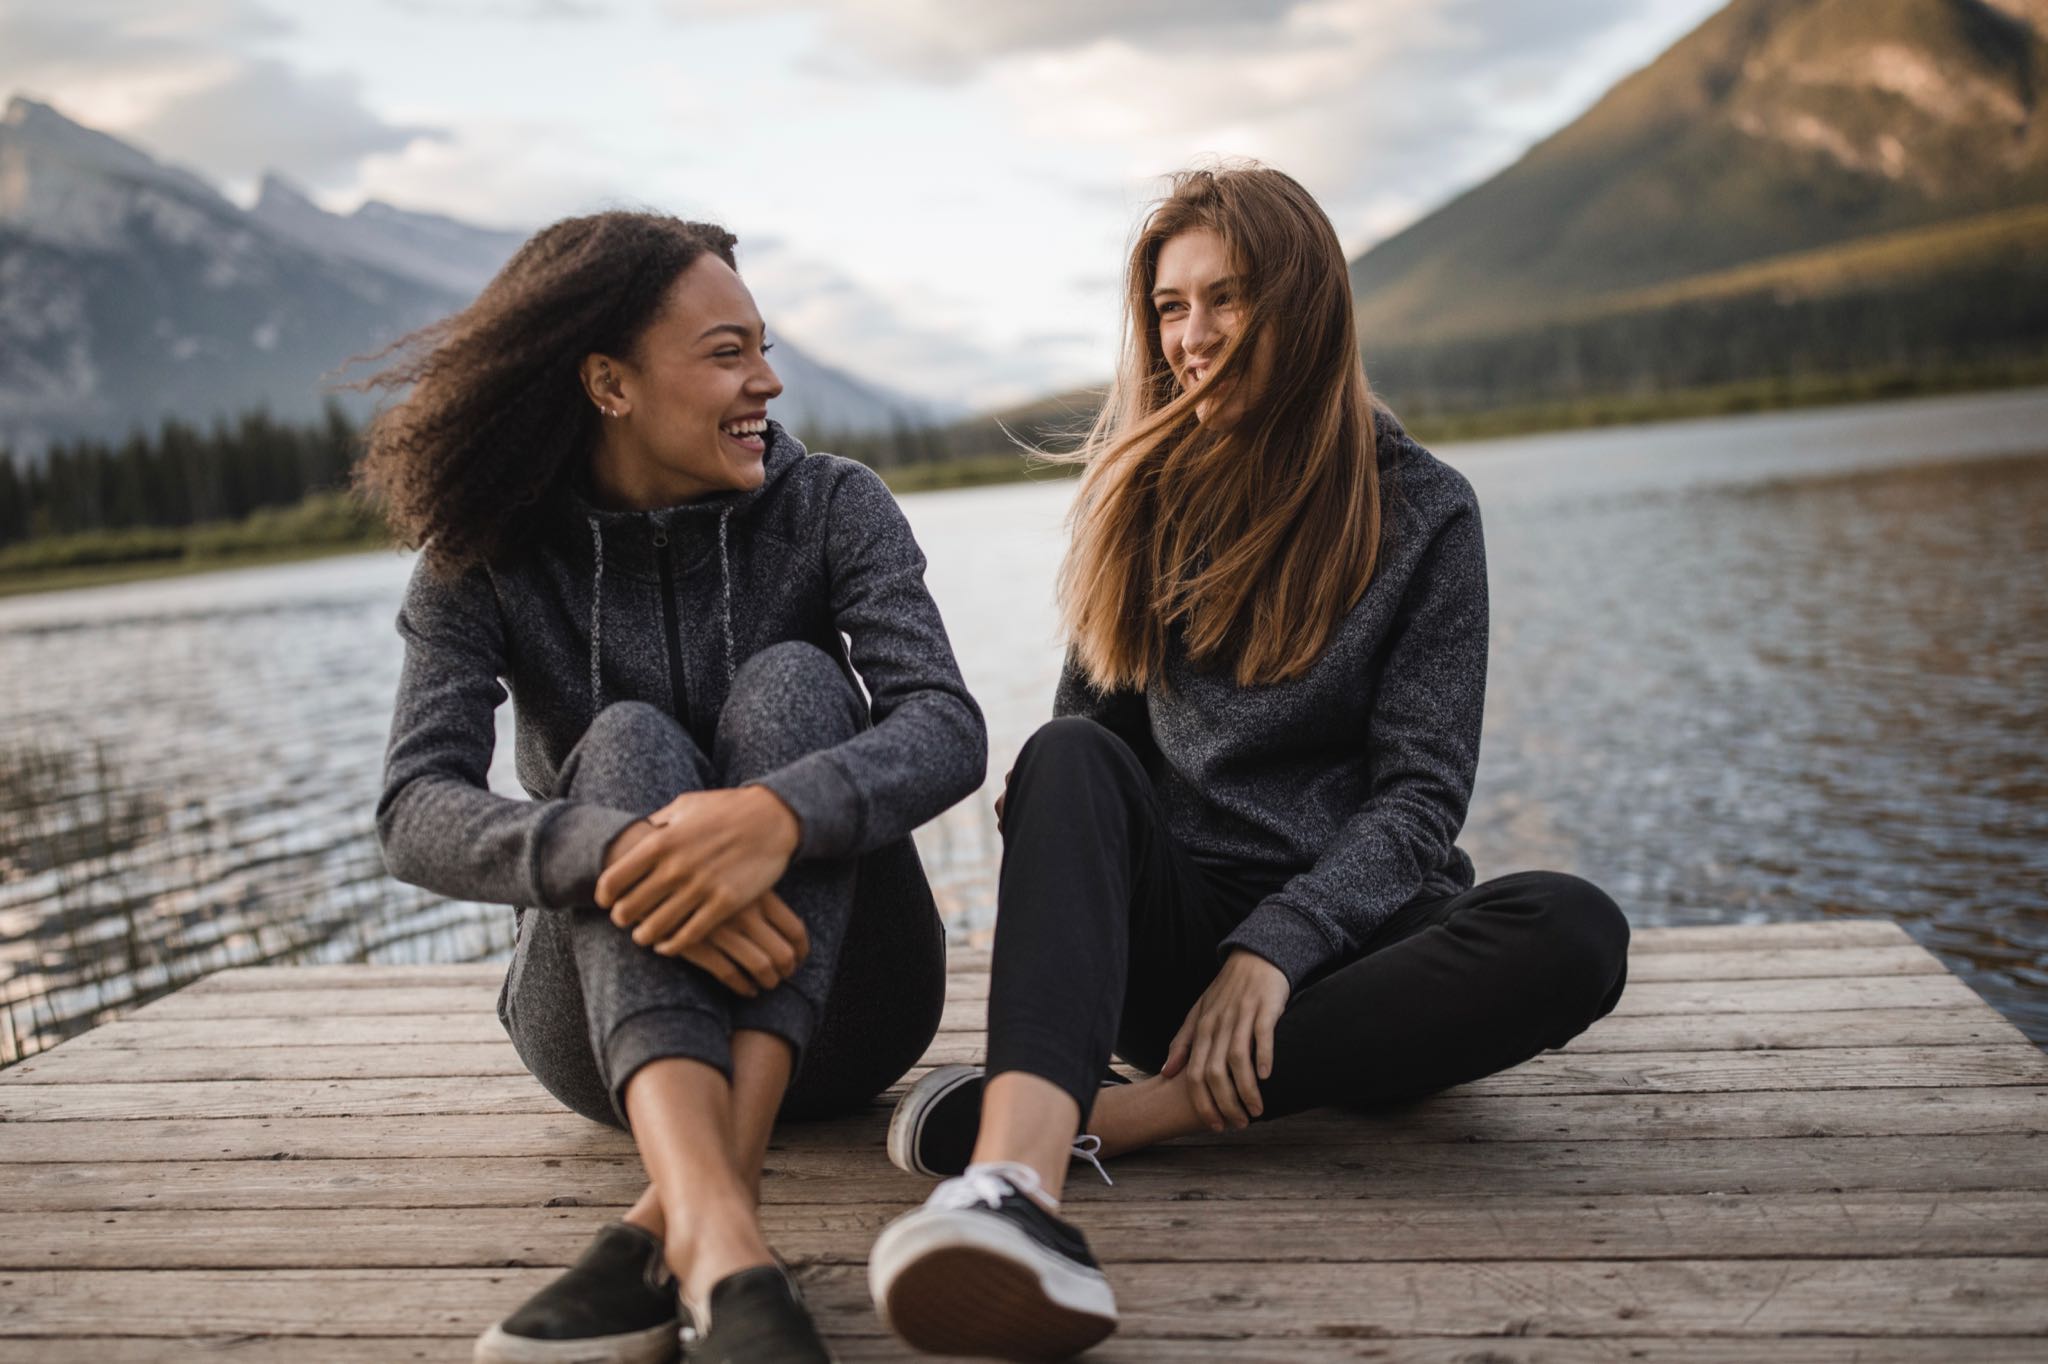 Clothing from Tentree worn by two models near a lake. 